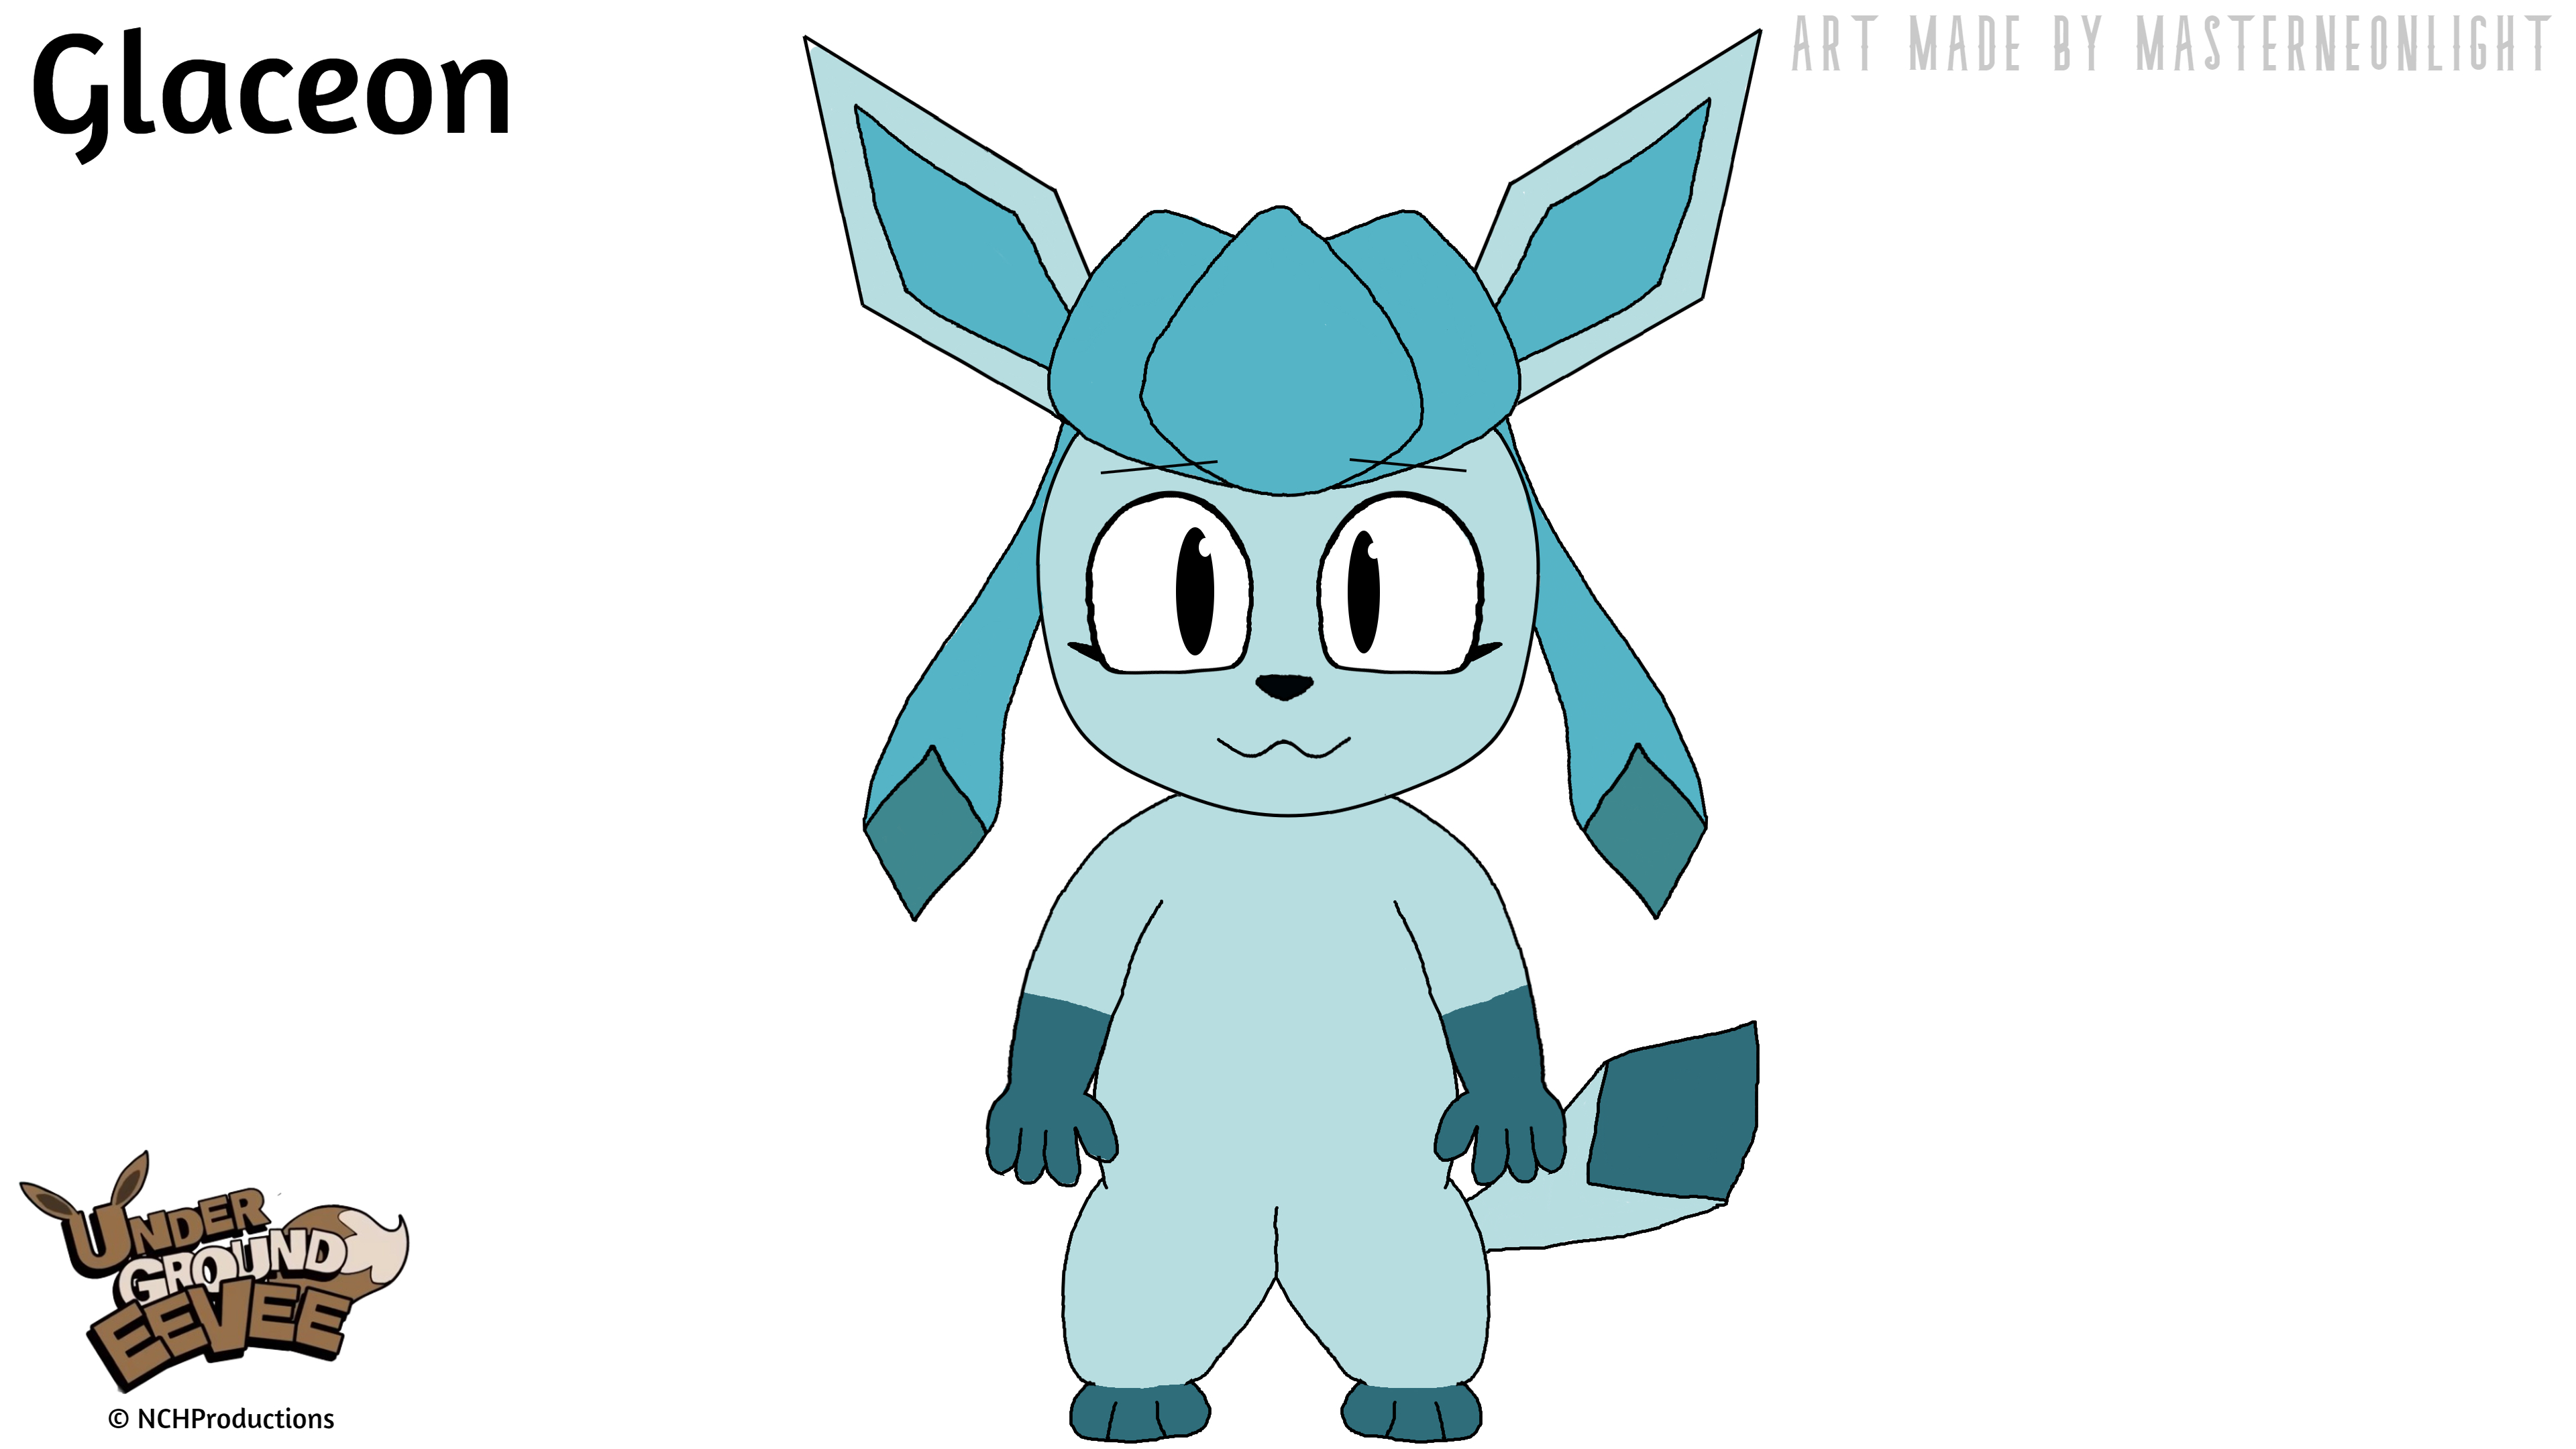 YIPPEE (Glaceon tbh) by Noxyfied on Newgrounds